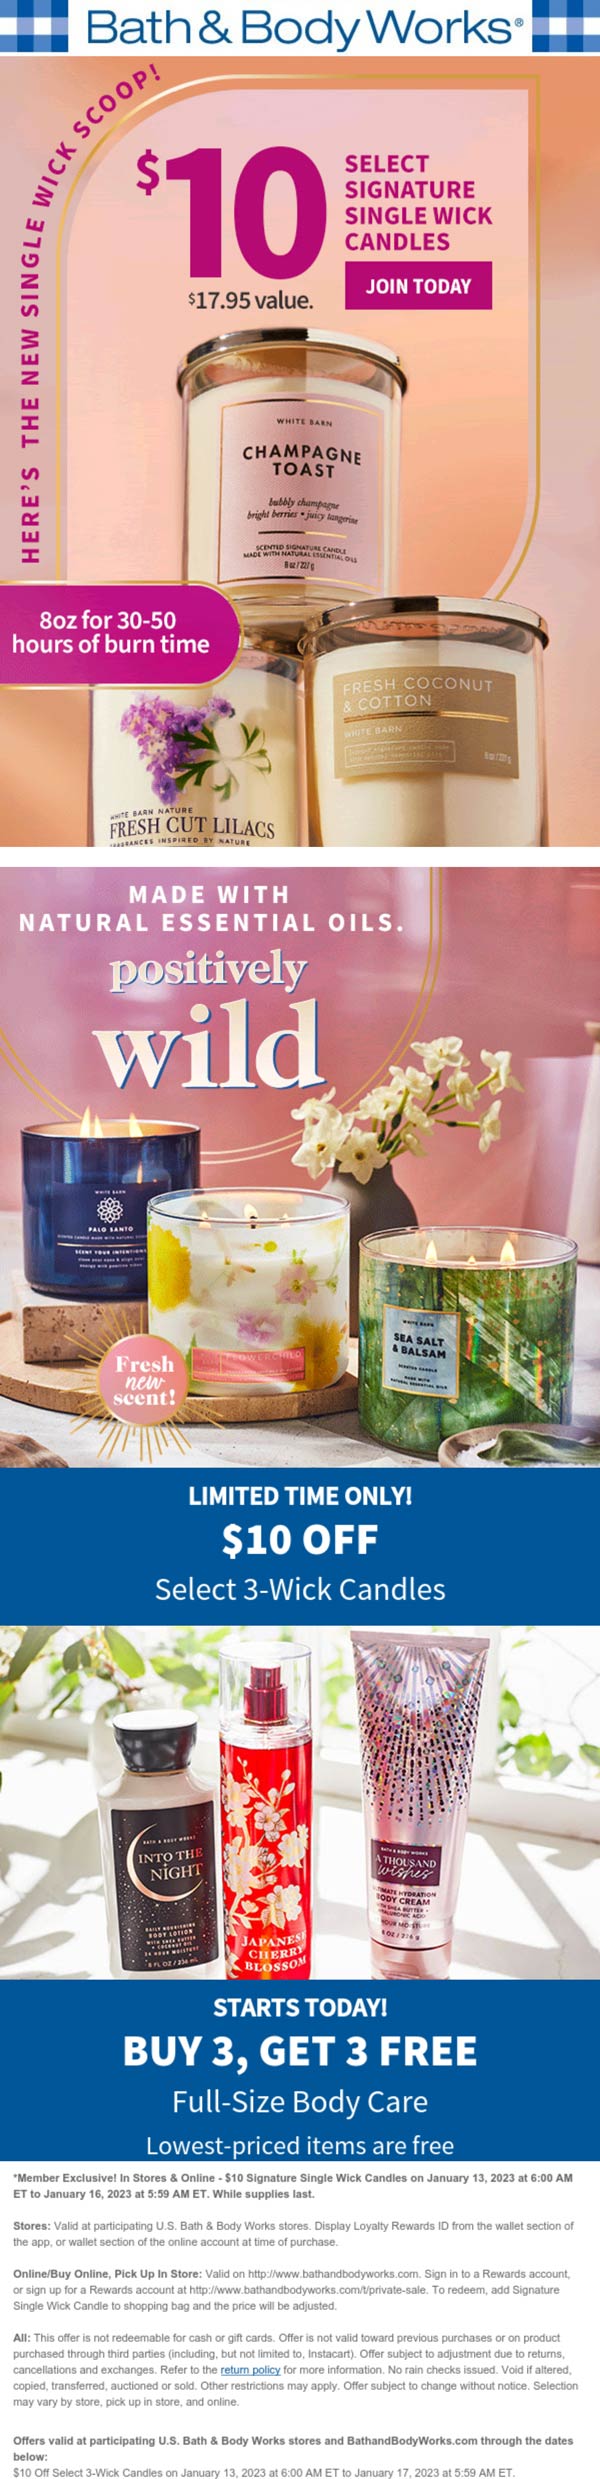 Bath & Body Works stores Coupon  6-for-3 on body care at Bath & Body Works #bathbodyworks 